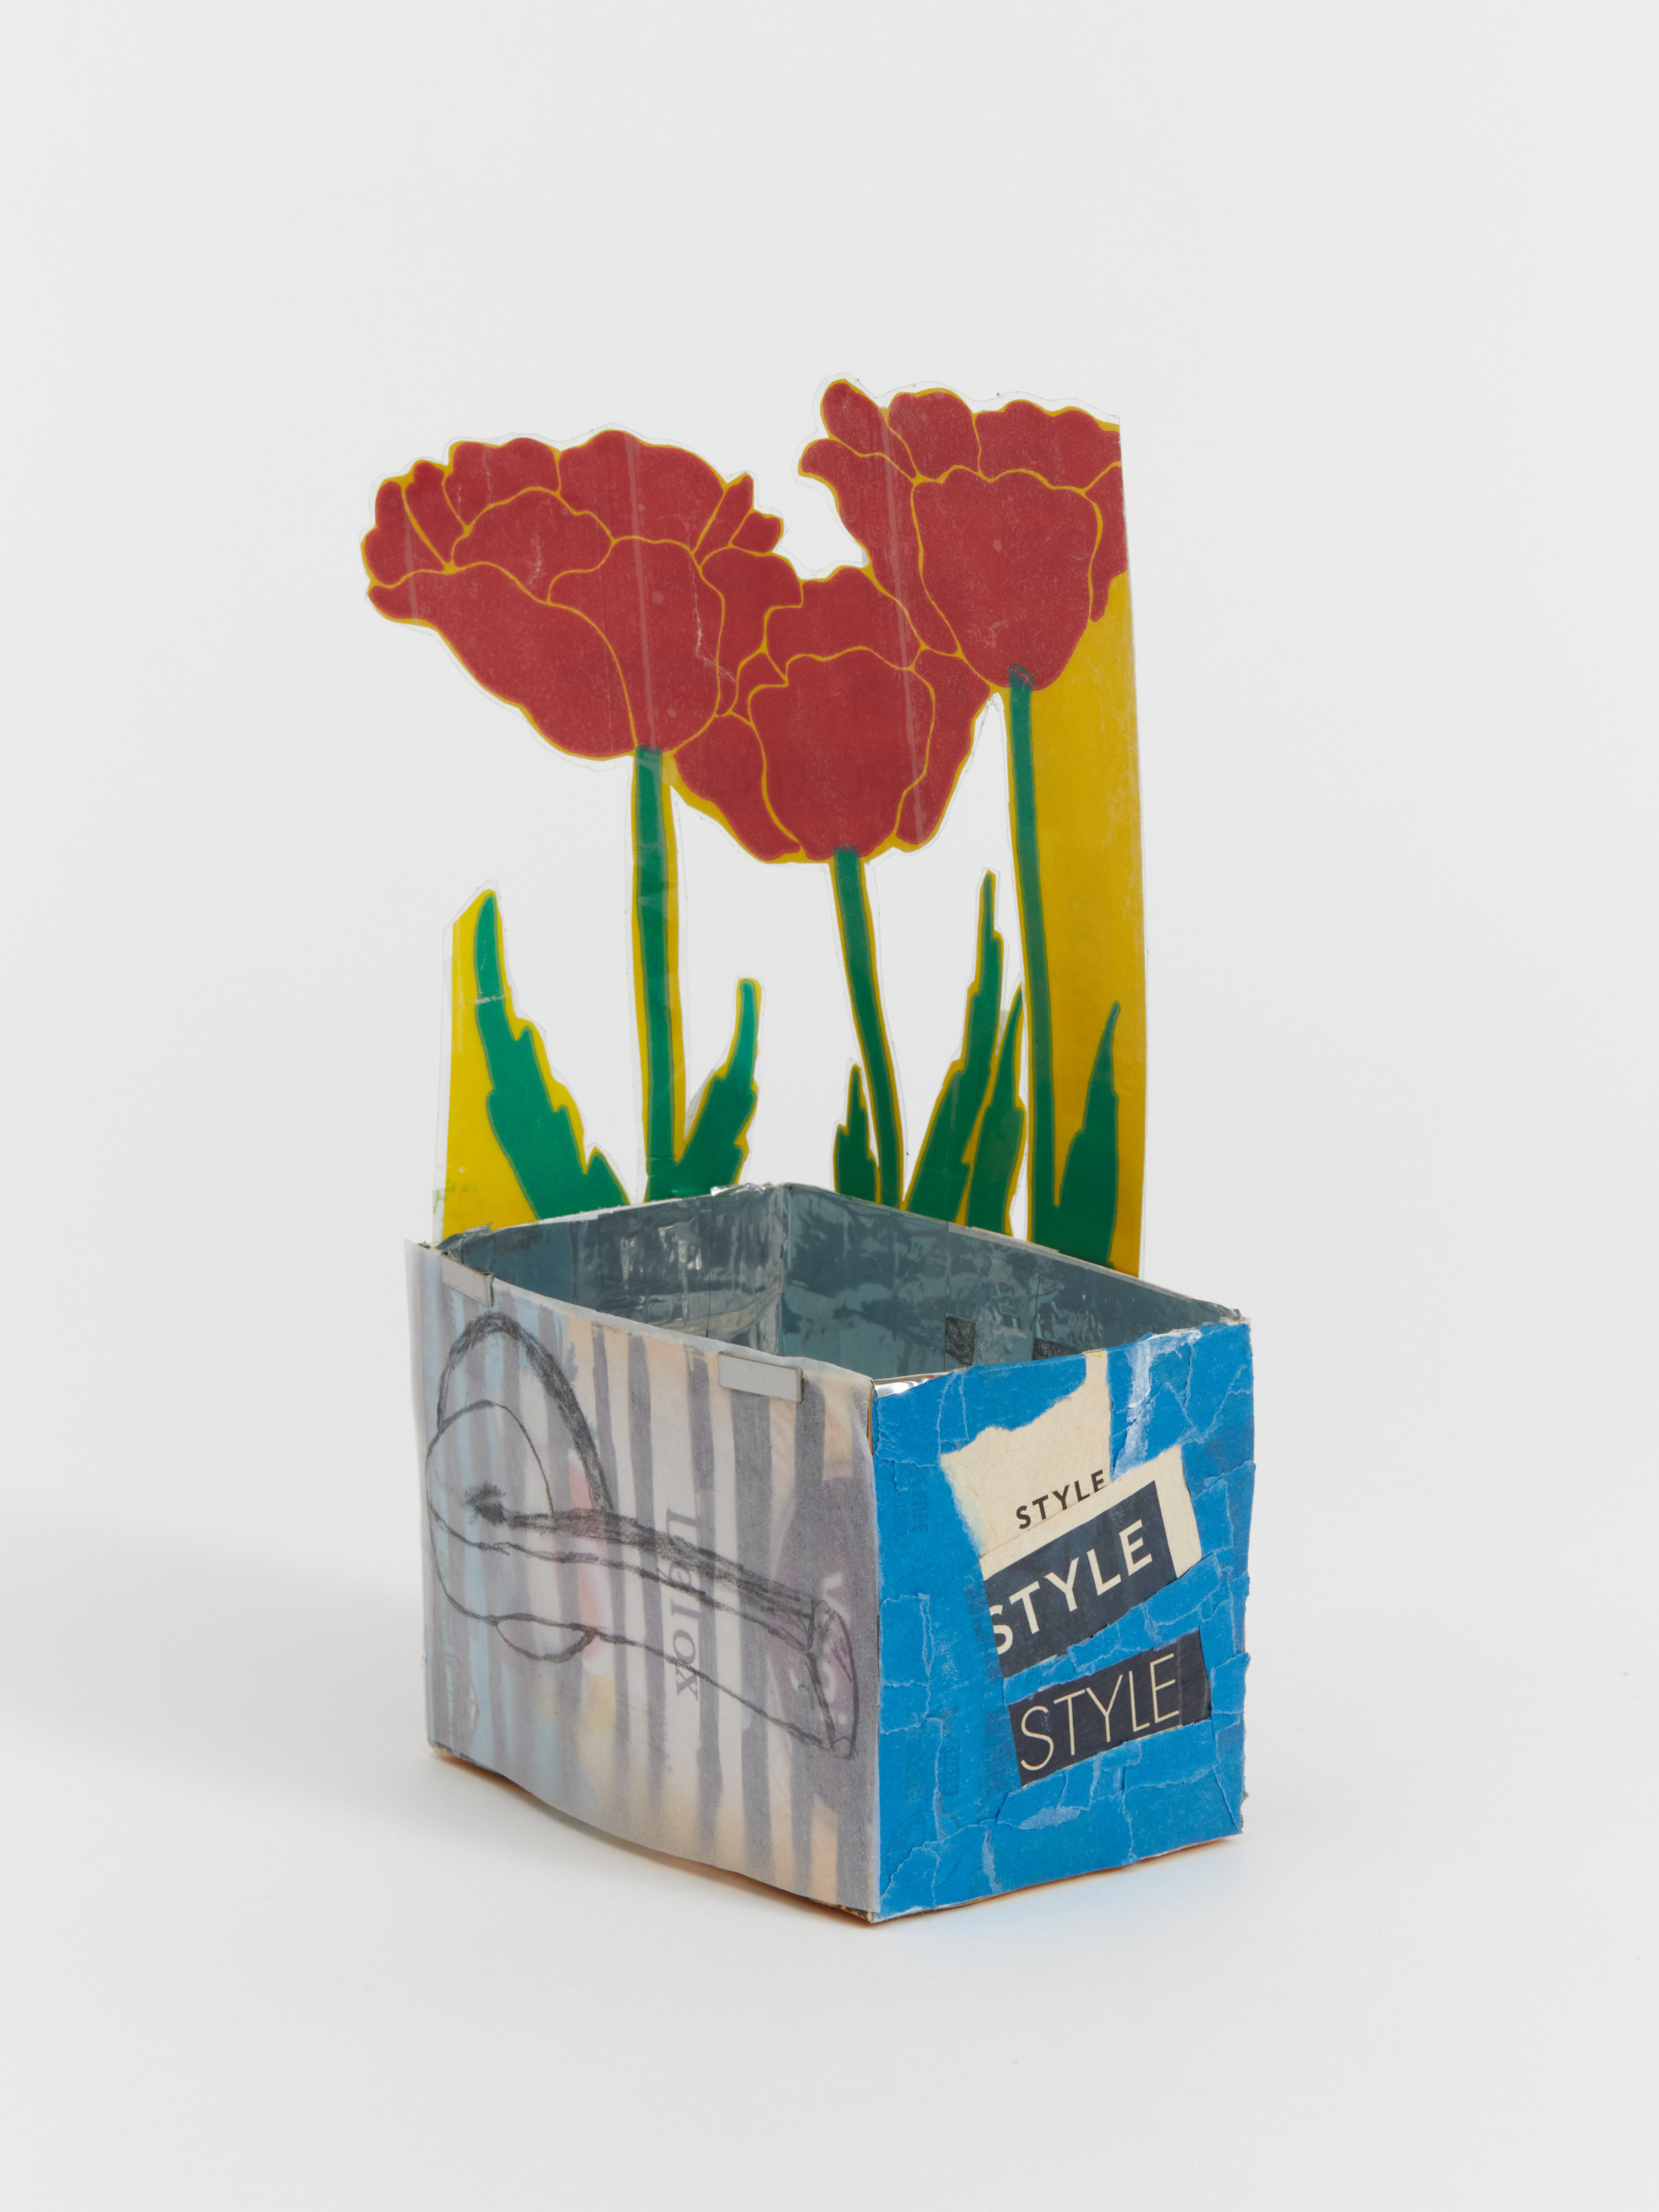 A box like sculpture with cut out red flowers adhered to the side. 